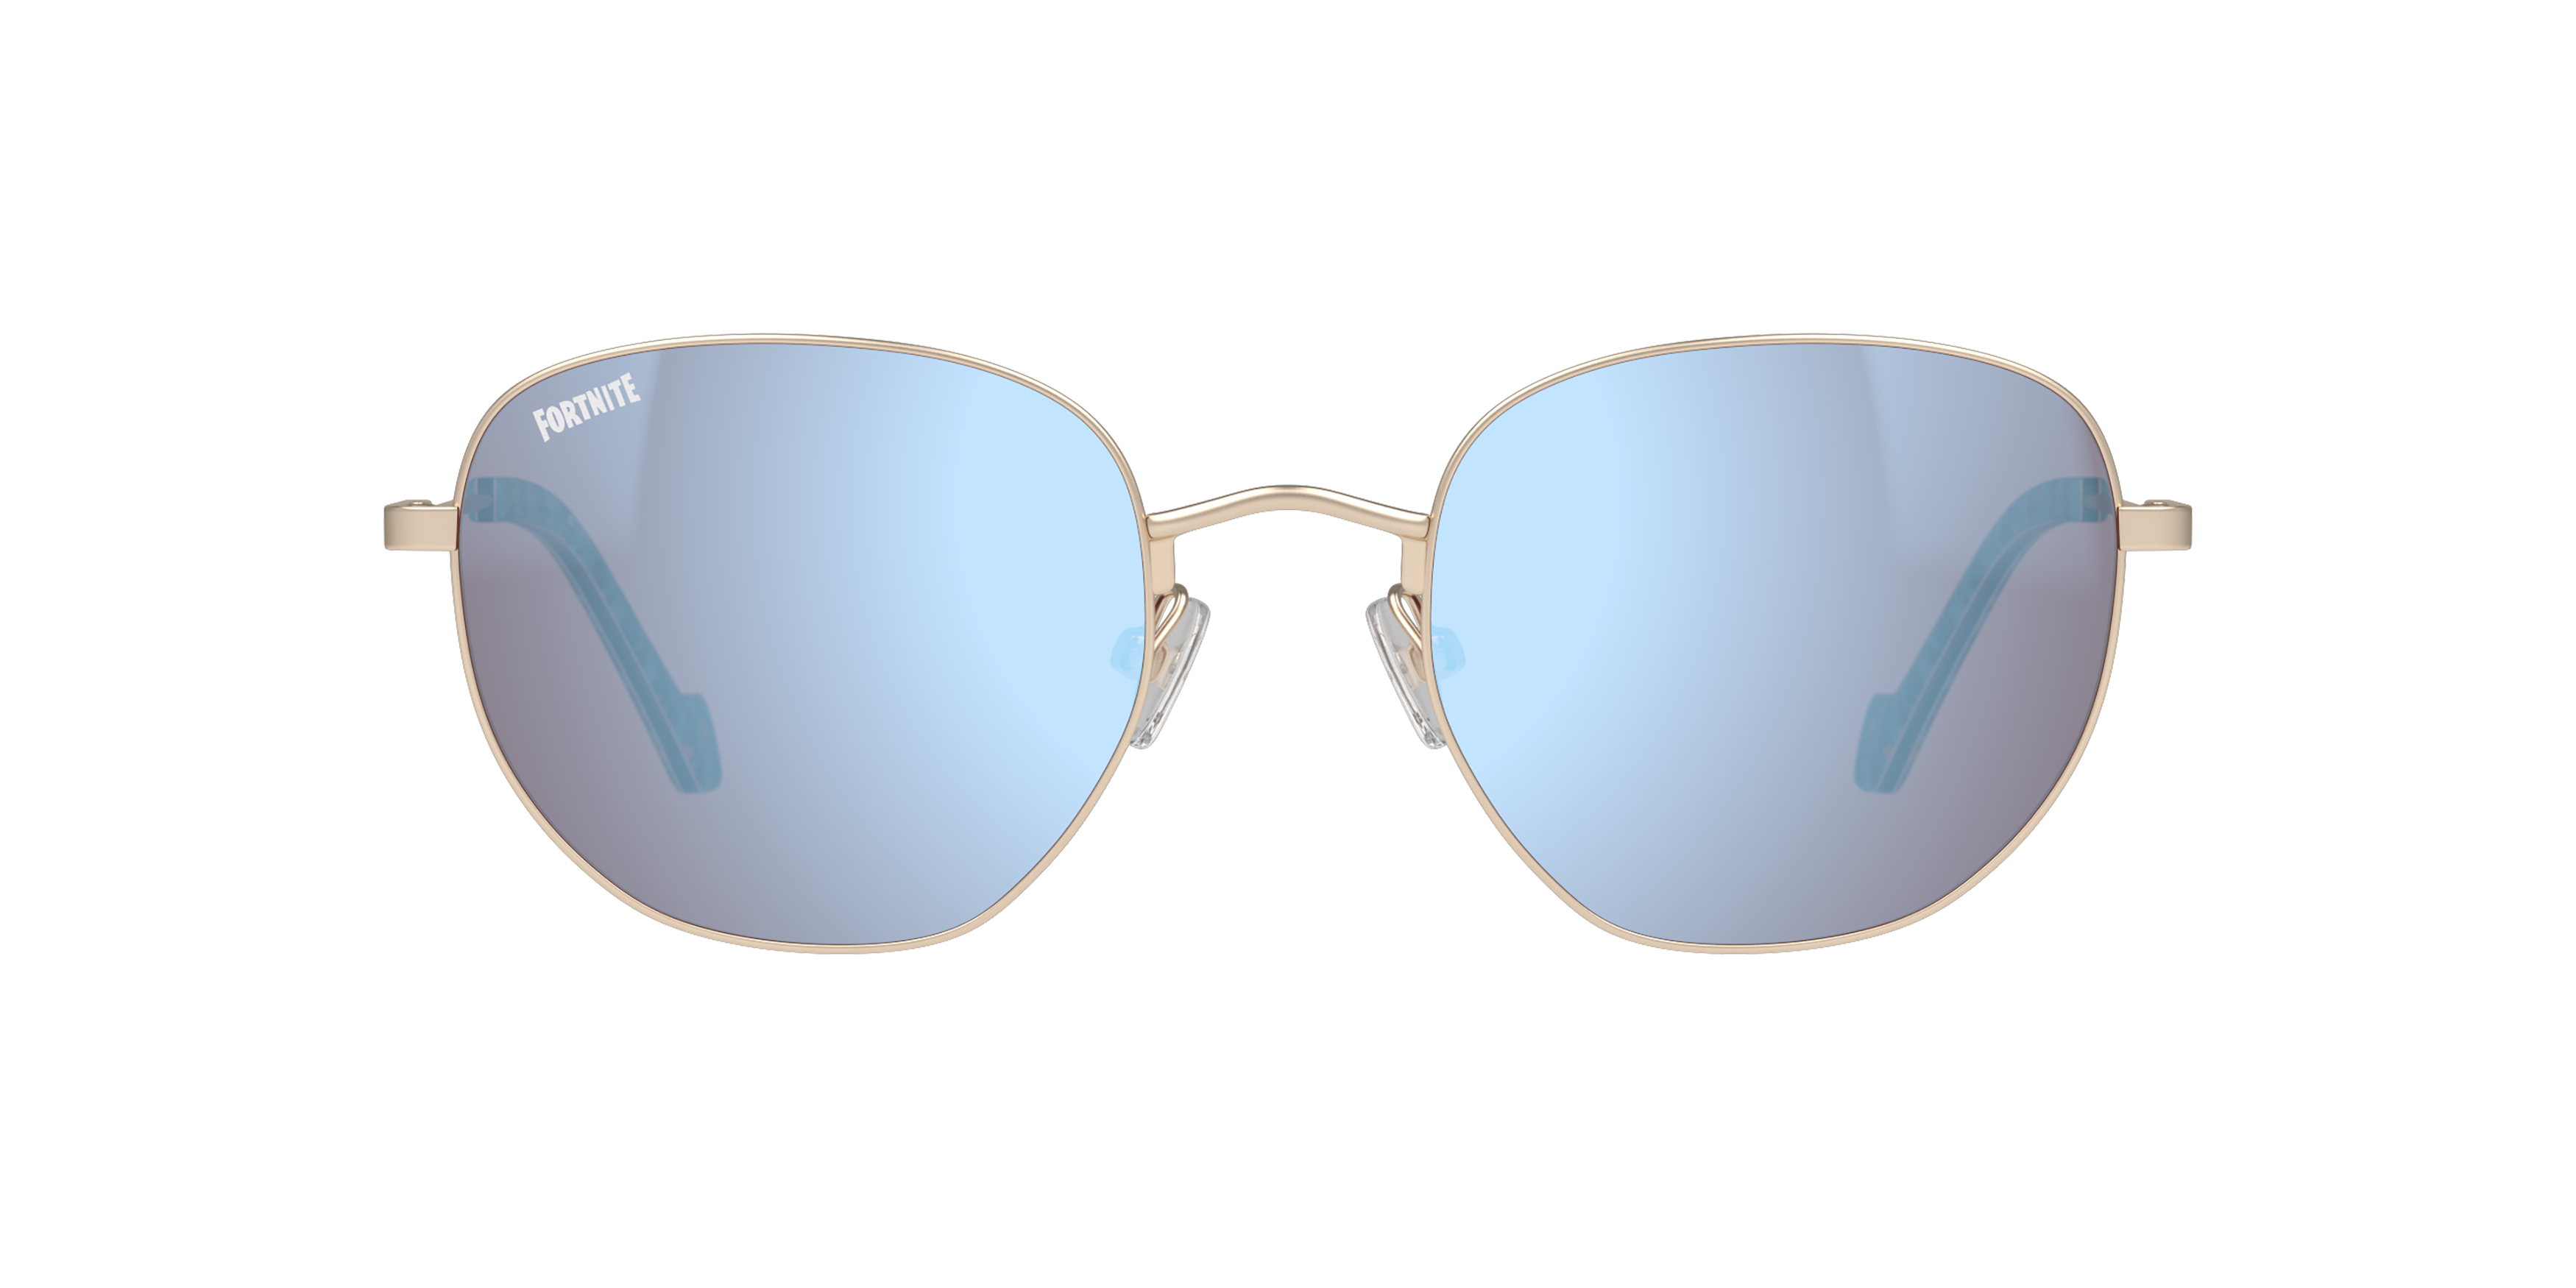 Front Fortnite with Unofficial UNSU0155 Sunglasses Grey / Gold